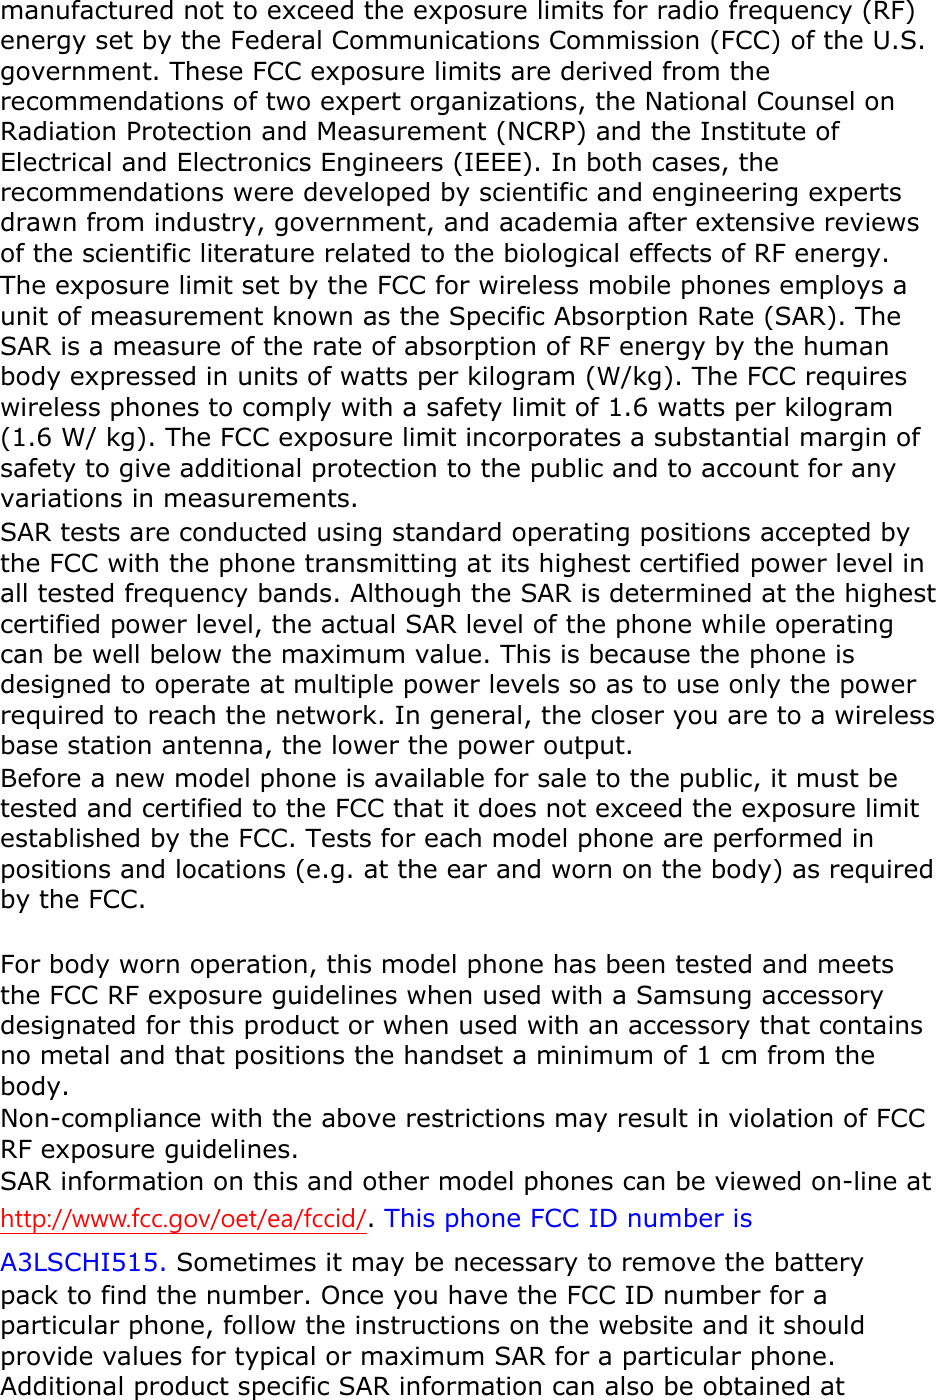 manufactured not to exceed the exposure limits for radio frequency (RF) energy set by the Federal Communications Commission (FCC) of the U.S. government. These FCC exposure limits are derived from the recommendations of two expert organizations, the National Counsel on Radiation Protection and Measurement (NCRP) and the Institute of Electrical and Electronics Engineers (IEEE). In both cases, the recommendations were developed by scientific and engineering experts drawn from industry, government, and academia after extensive reviews of the scientific literature related to the biological effects of RF energy. The exposure limit set by the FCC for wireless mobile phones employs a unit of measurement known as the Specific Absorption Rate (SAR). The SAR is a measure of the rate of absorption of RF energy by the human body expressed in units of watts per kilogram (W/kg). The FCC requires wireless phones to comply with a safety limit of 1.6 watts per kilogram (1.6 W/ kg). The FCC exposure limit incorporates a substantial margin of safety to give additional protection to the public and to account for any variations in measurements. SAR tests are conducted using standard operating positions accepted by the FCC with the phone transmitting at its highest certified power level in all tested frequency bands. Although the SAR is determined at the highest certified power level, the actual SAR level of the phone while operating can be well below the maximum value. This is because the phone is designed to operate at multiple power levels so as to use only the power required to reach the network. In general, the closer you are to a wireless base station antenna, the lower the power output. Before a new model phone is available for sale to the public, it must be tested and certified to the FCC that it does not exceed the exposure limit established by the FCC. Tests for each model phone are performed in positions and locations (e.g. at the ear and worn on the body) as required by the FCC.      For body worn operation, this model phone has been tested and meets the FCC RF exposure guidelines when used with a Samsung accessory designated for this product or when used with an accessory that contains no metal and that positions the handset a minimum of 1 cm from the body.   Non-compliance with the above restrictions may result in violation of FCC RF exposure guidelines. SAR information on this and other model phones can be viewed on-line at http://www.fcc.gov/oet/ea/fccid/. This phone FCC ID number isA3LSCHI515. Sometimes it may be necessary to remove the battery pack to find the number. Once you have the FCC ID number for a particular phone, follow the instructions on the website and it should provide values for typical or maximum SAR for a particular phone. Additional product specific SAR information can also be obtained at 